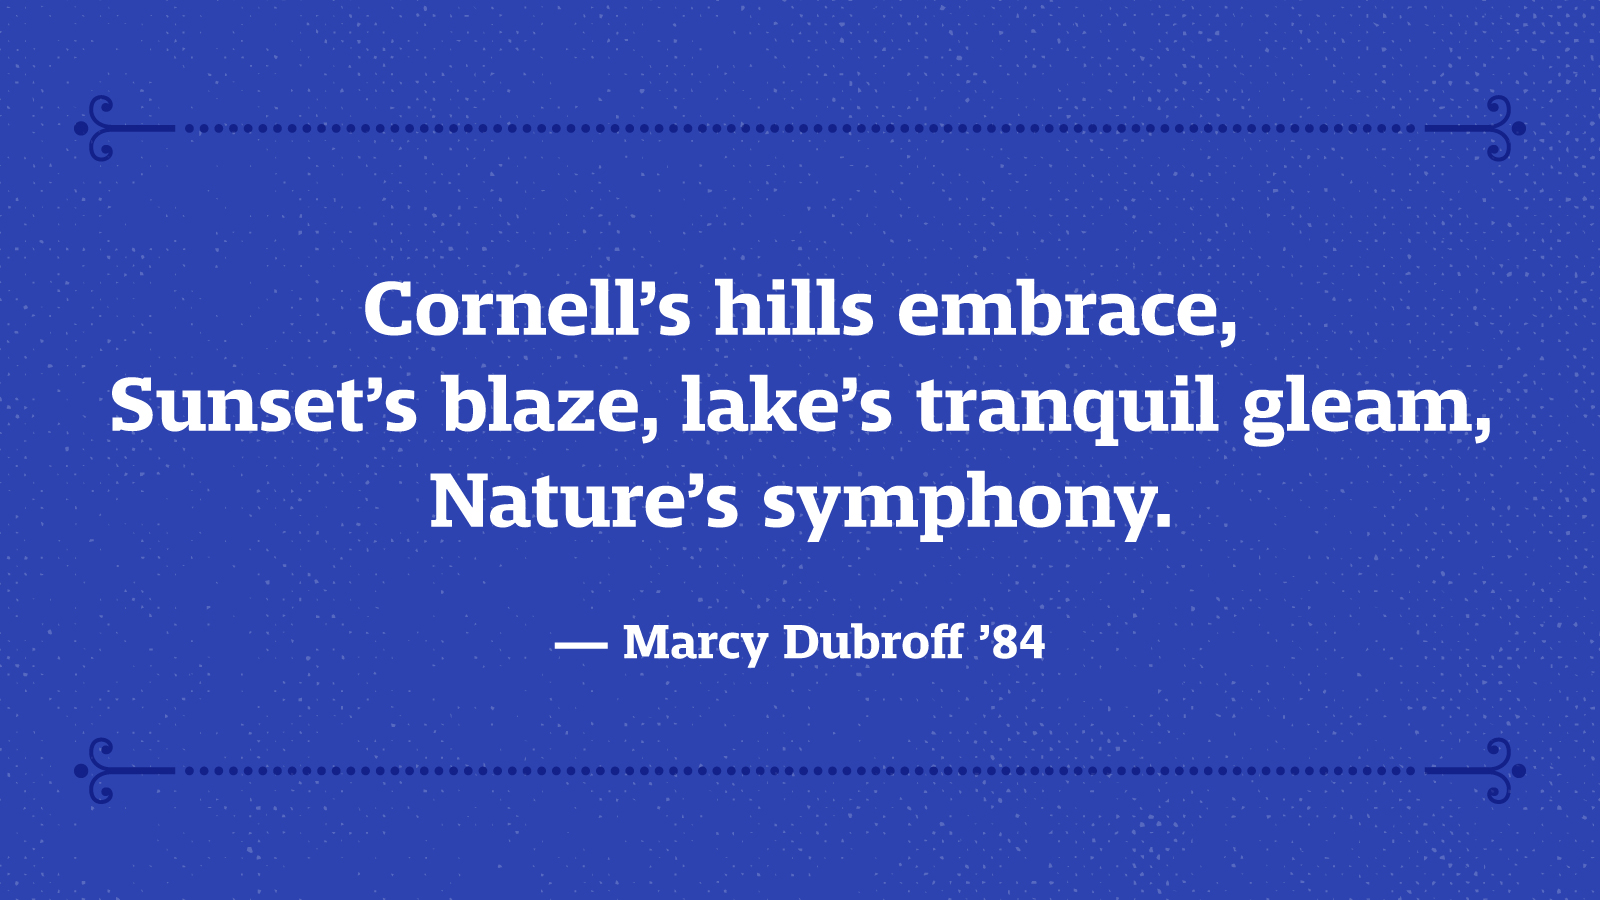 Cornell’s hills embrace, Sunset’s blaze, lake’s tranquil gleam, Nature’s symphony. — Marcy Dubroff ’84